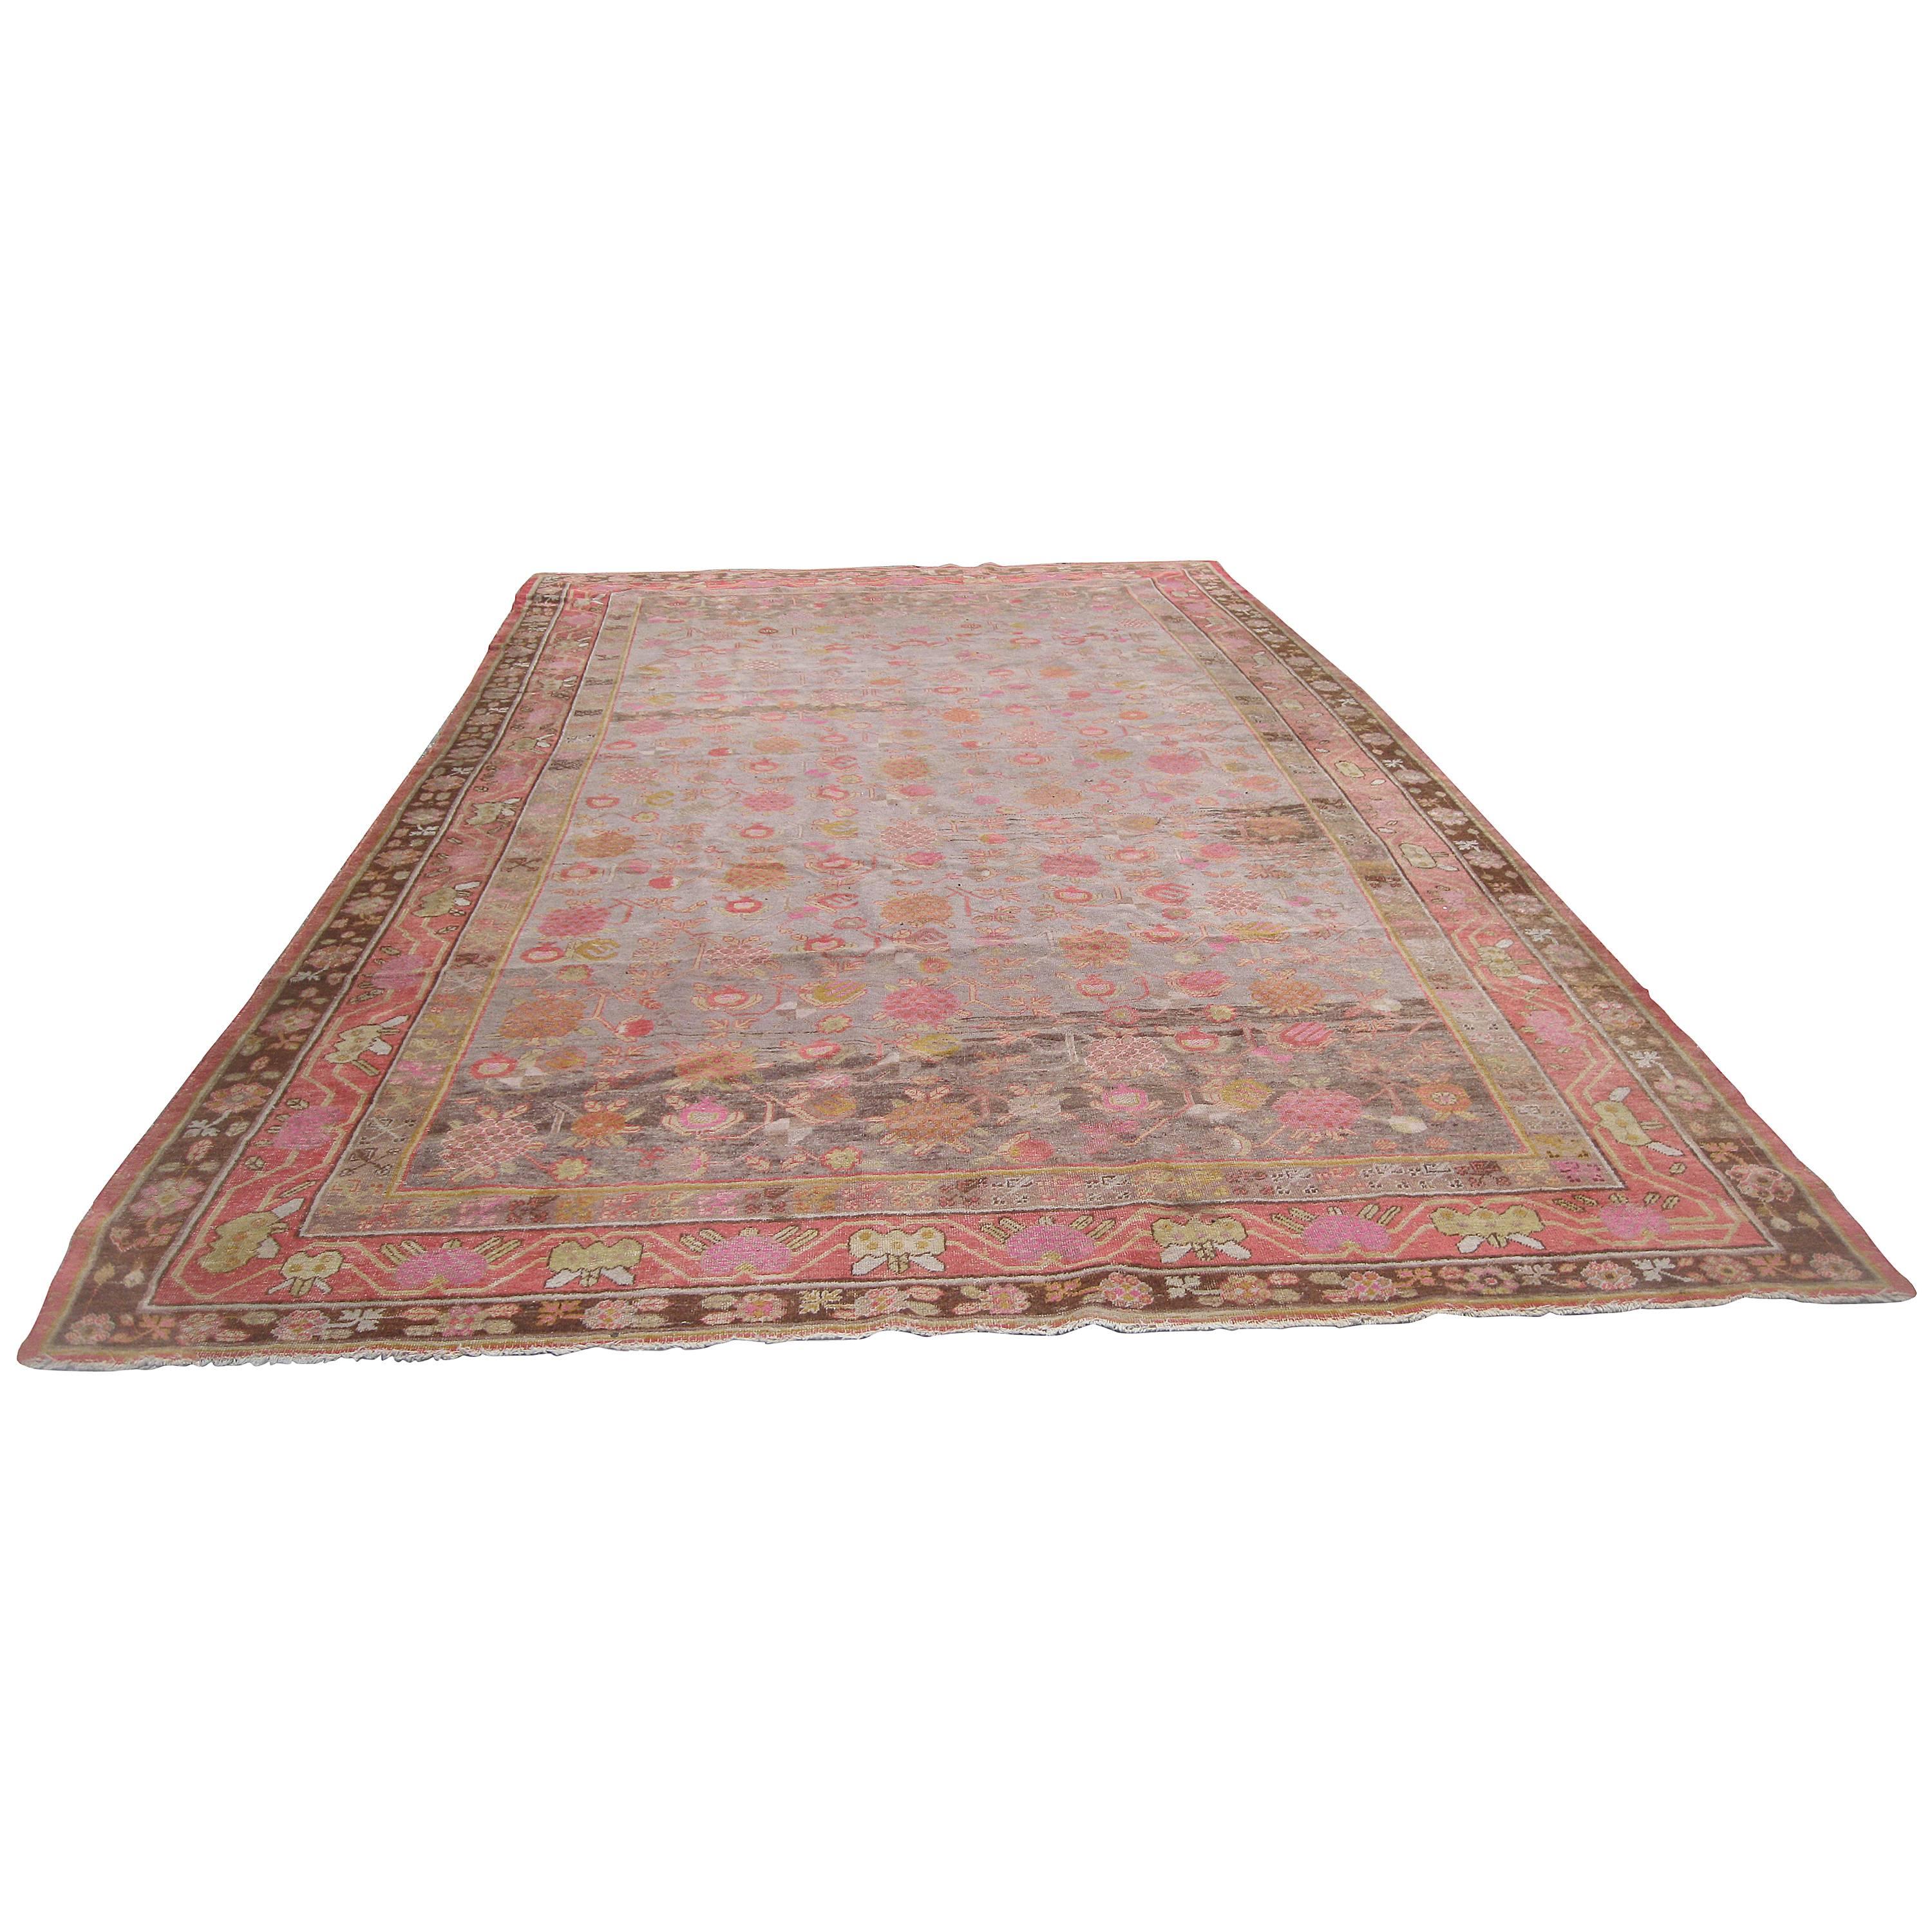 Antique Khotan Rug with Eight Band Border in Browns and Oranges For Sale